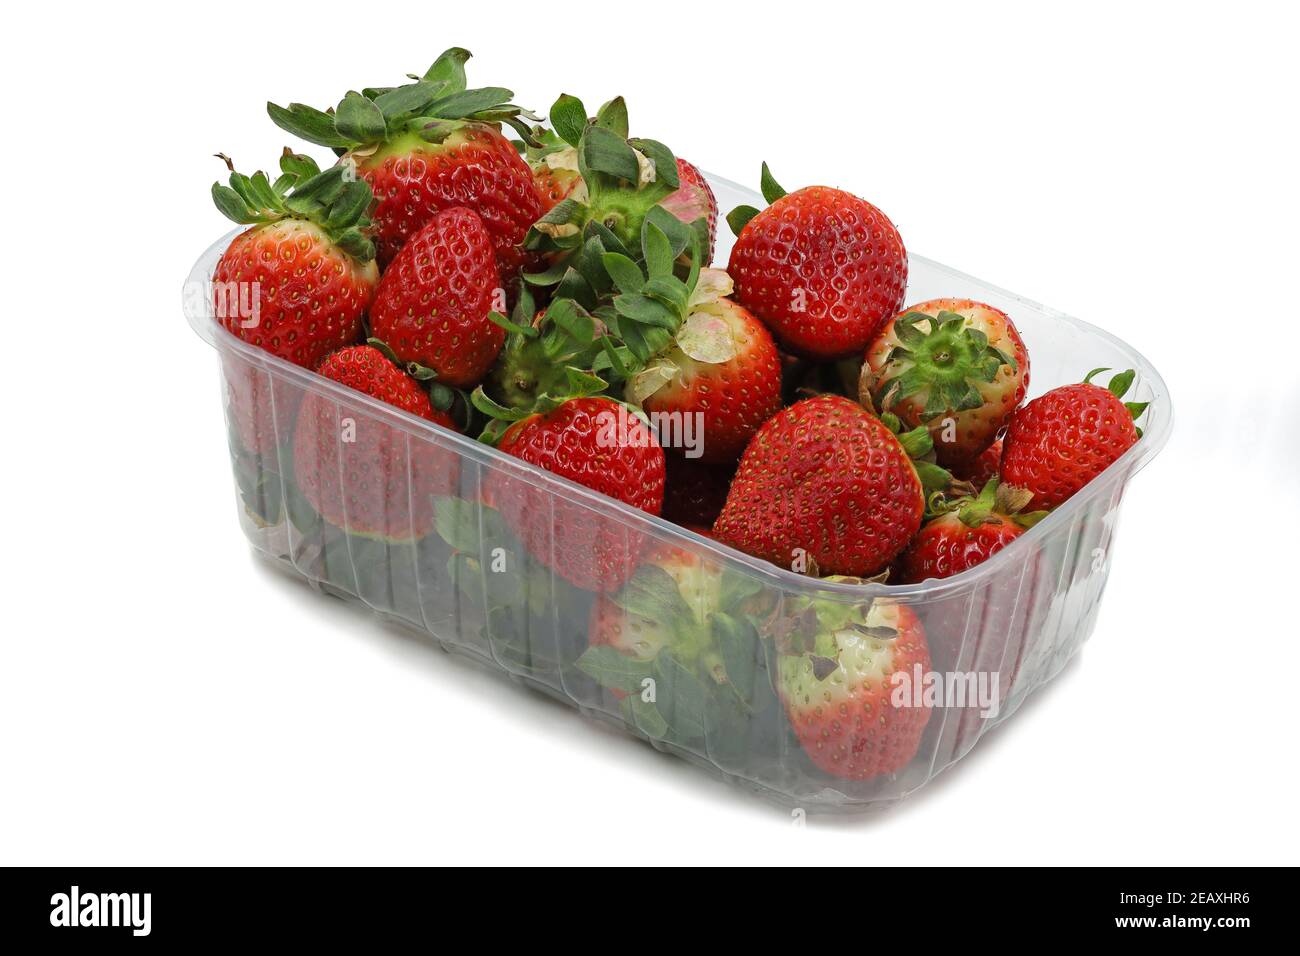 Plastic container with natural looking ripe strawberries isolated on white background Stock Photo